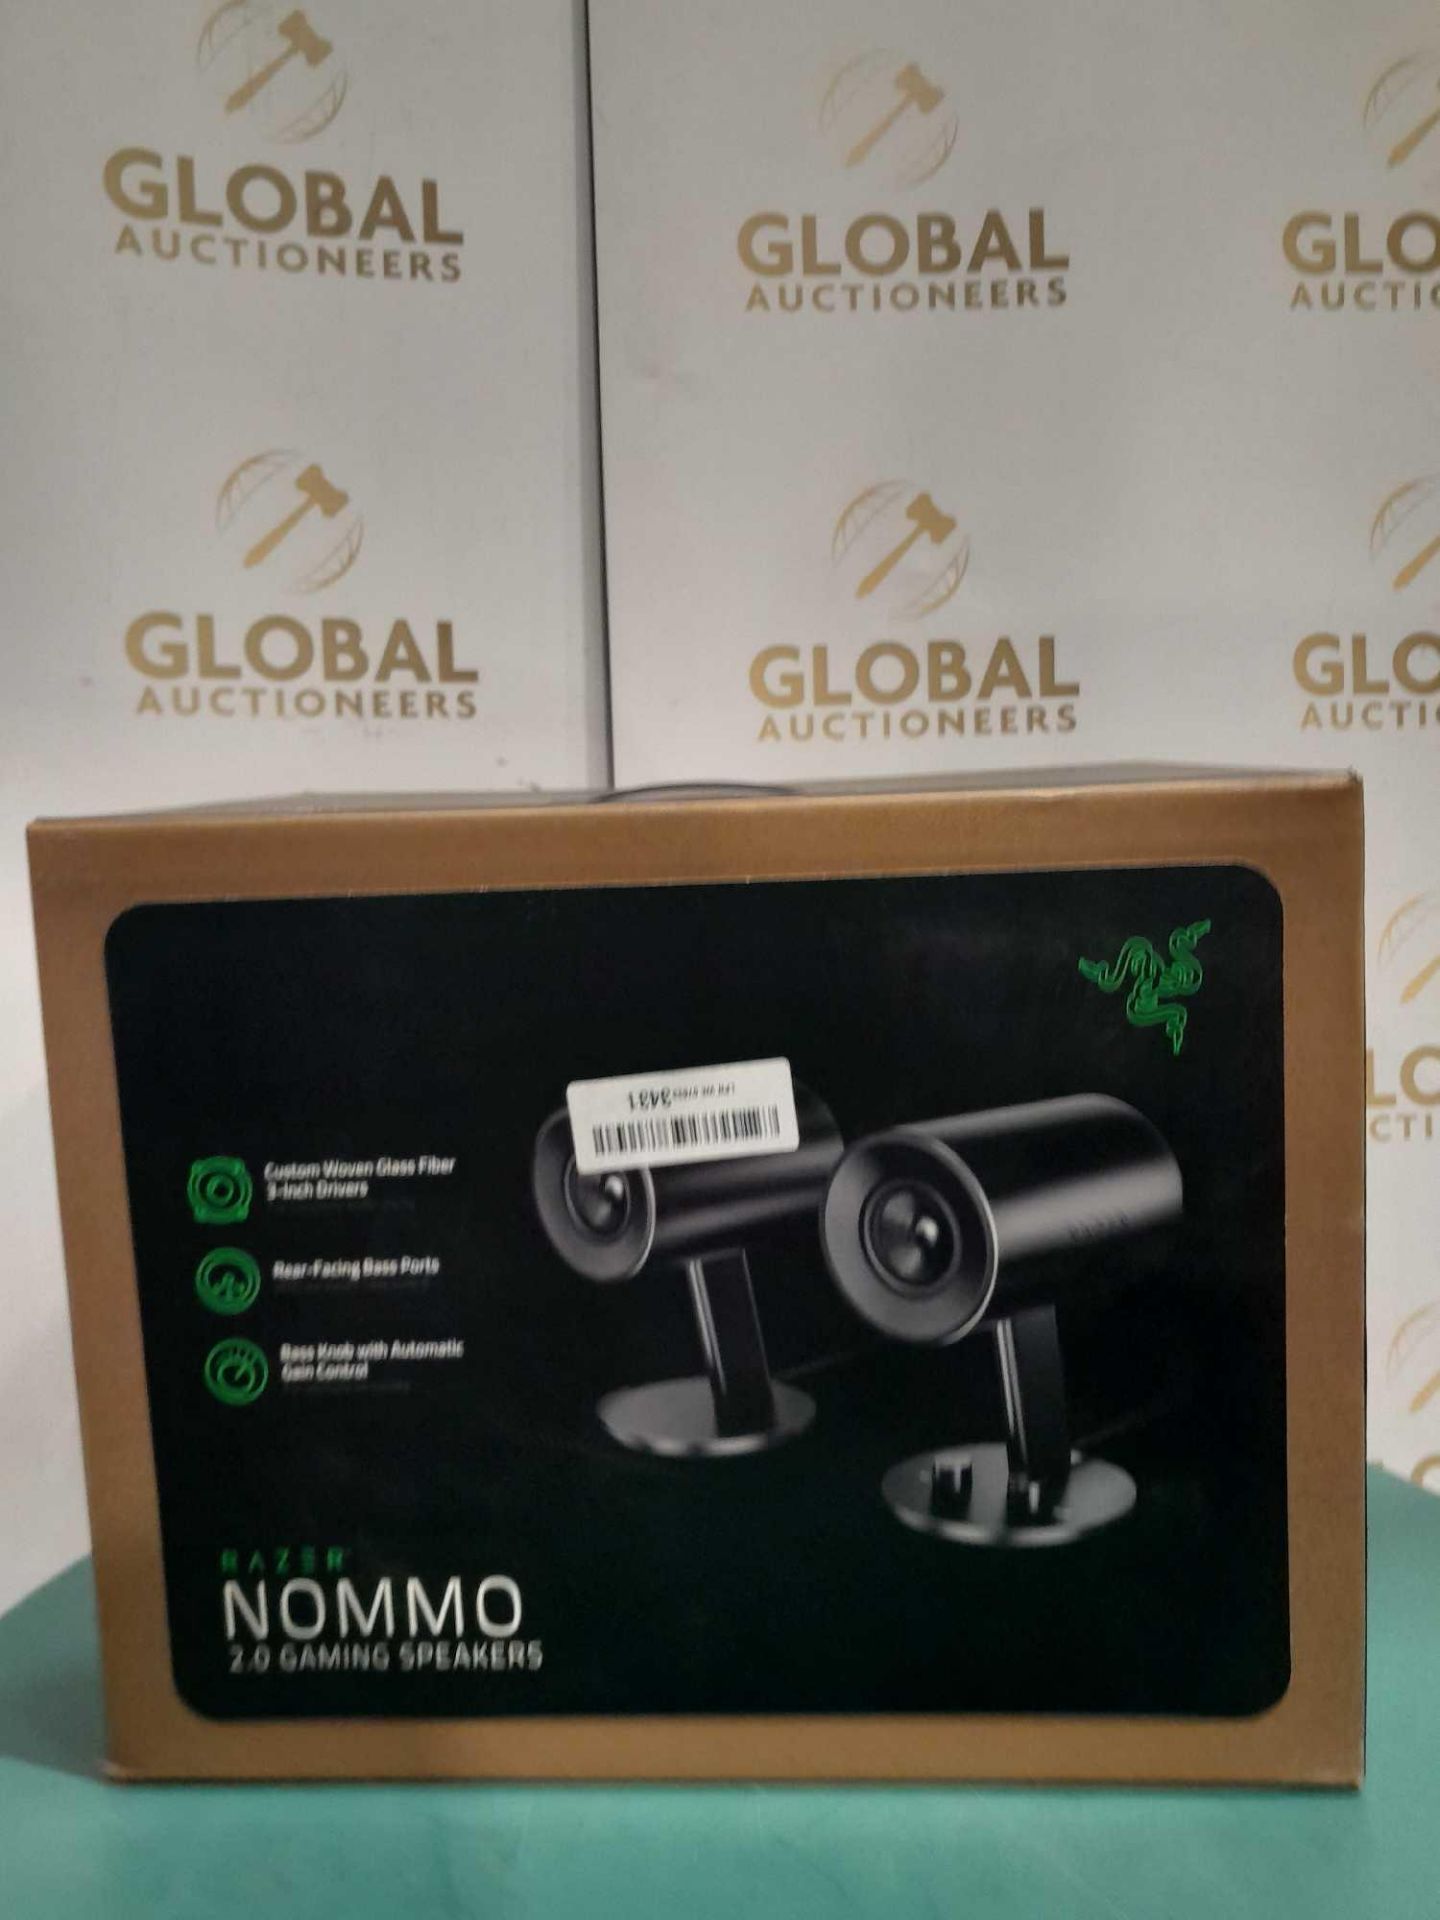 RRP £150 Boxed Razer Nommo 2.0 Gaming Speakers - Image 2 of 2